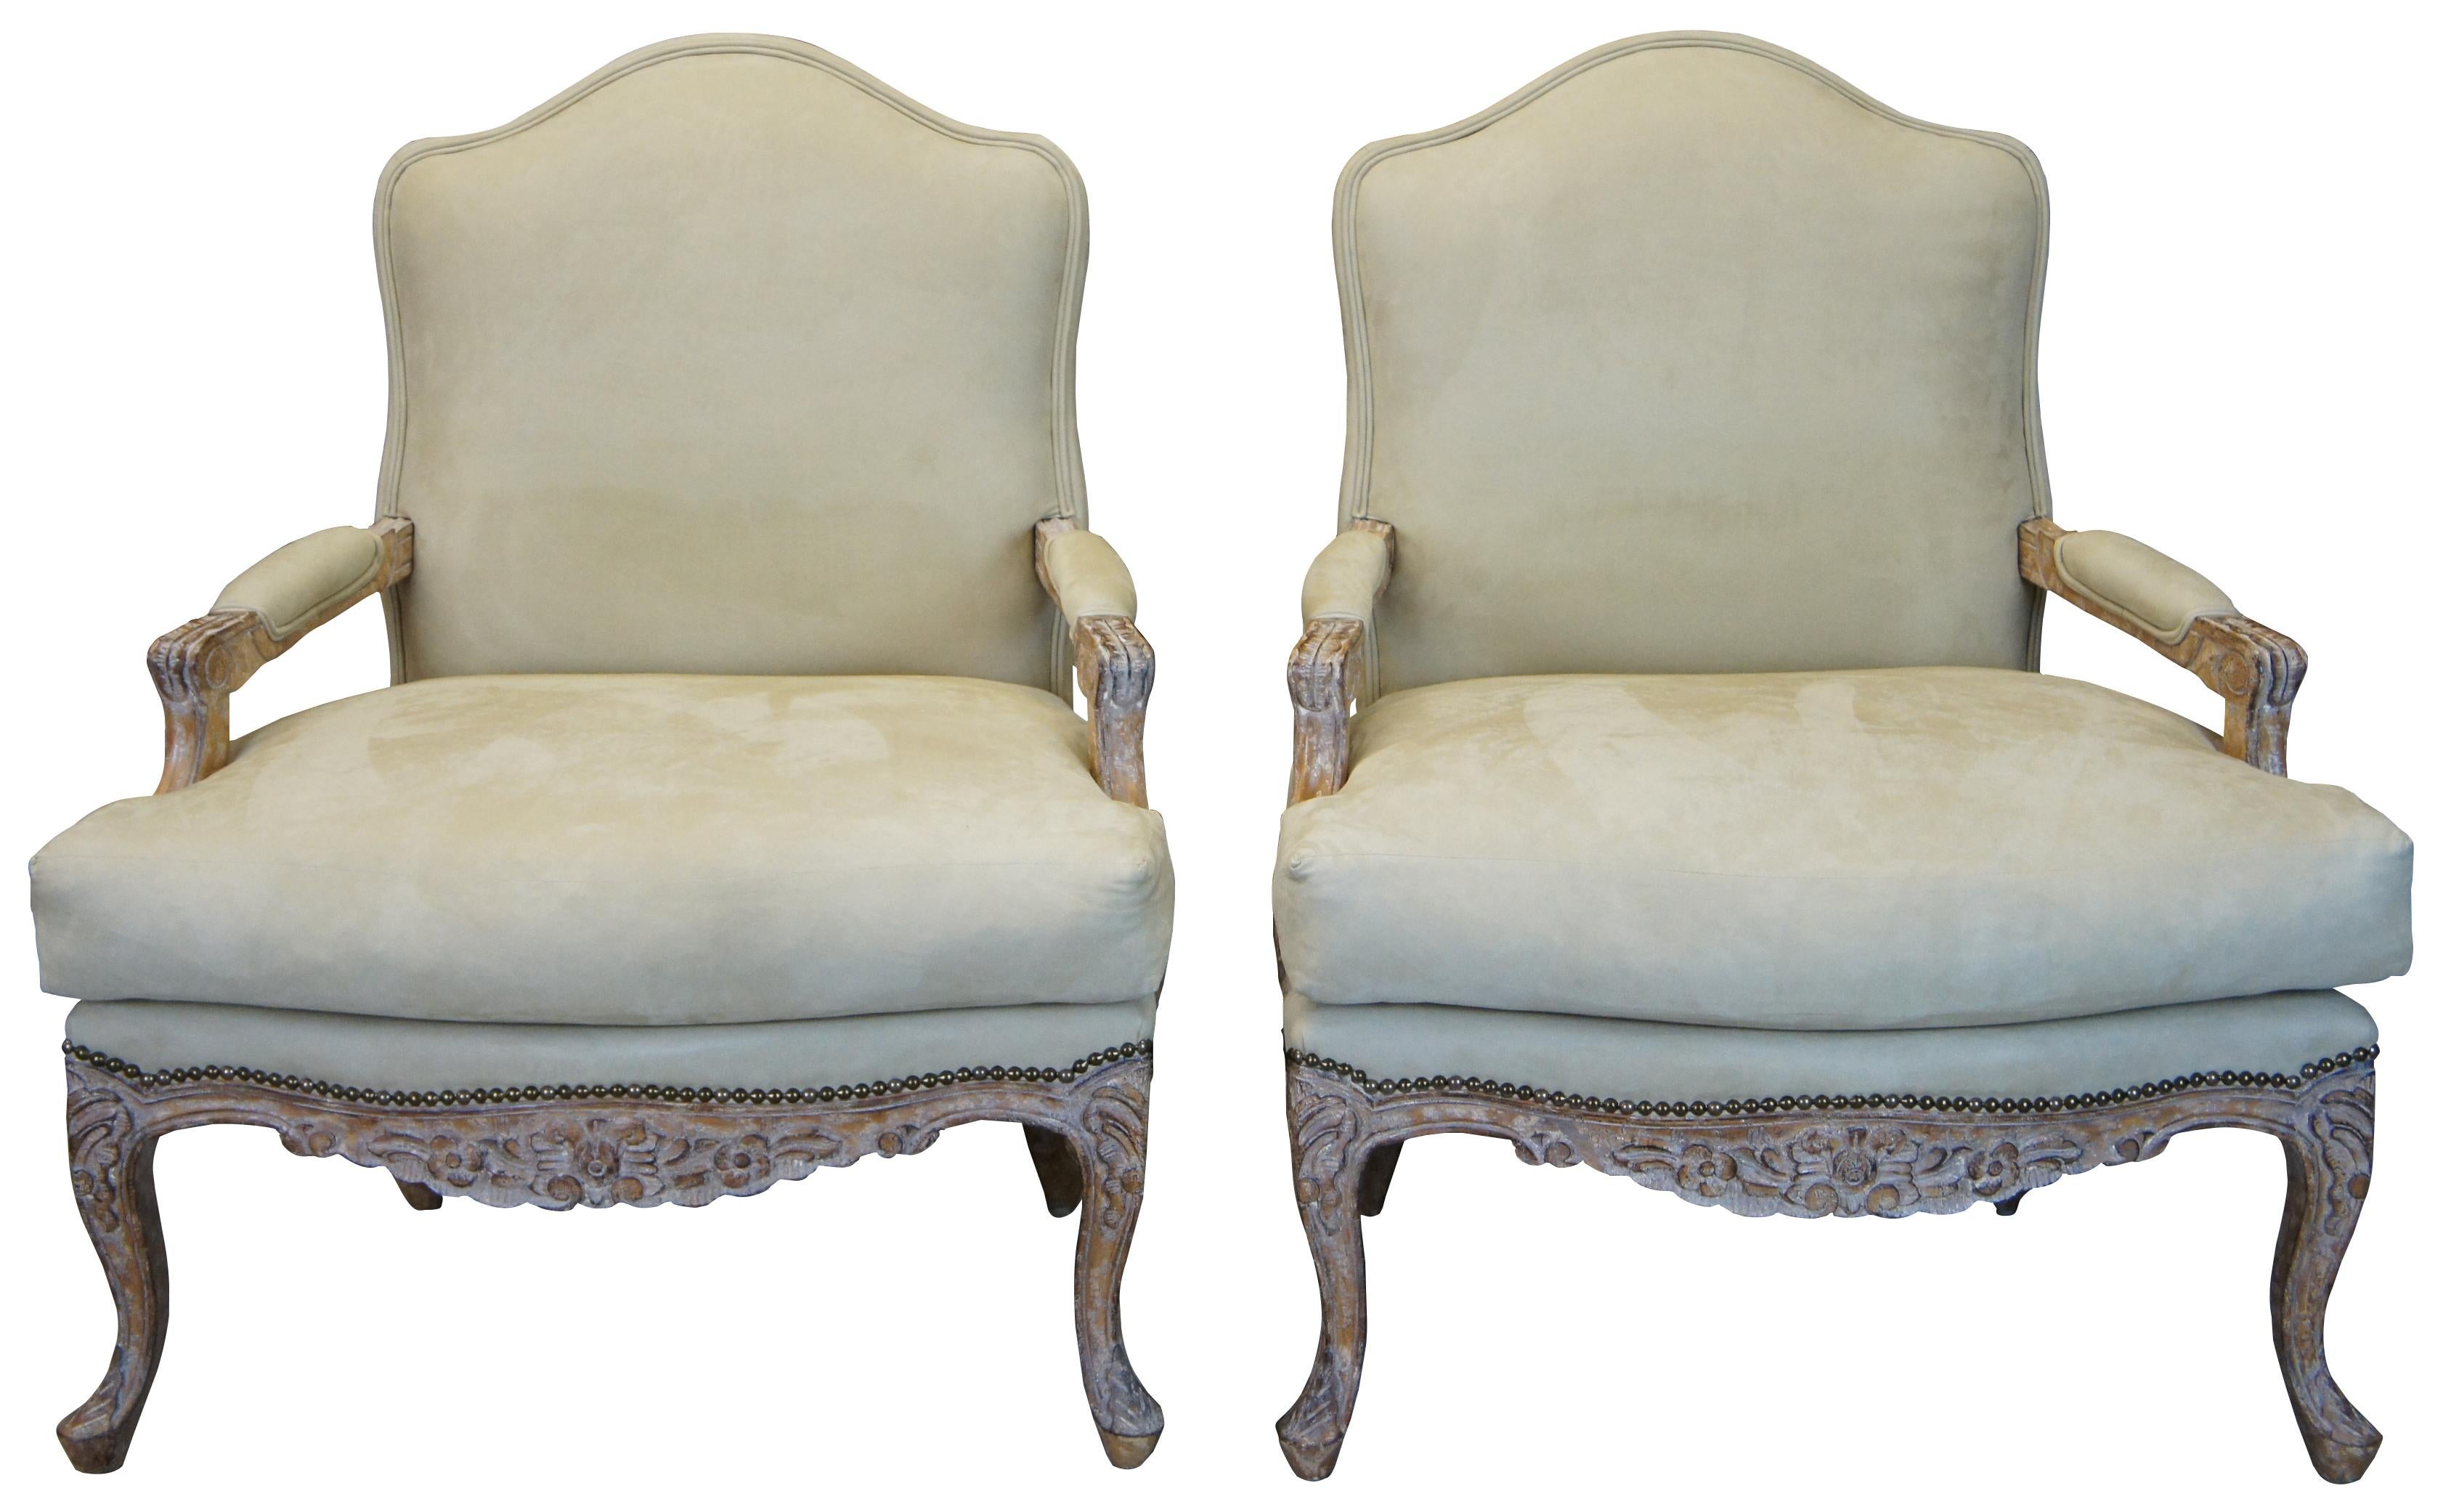 Relax in the Marquesa lounge chair. Feather and down filled cushions rest upon the oversized hand carved wood frame infusing comfort and elegance. Includes Ottoman. A nice blend of French Louis Xv, Spanish and Mediterranean styling. Upholstered in